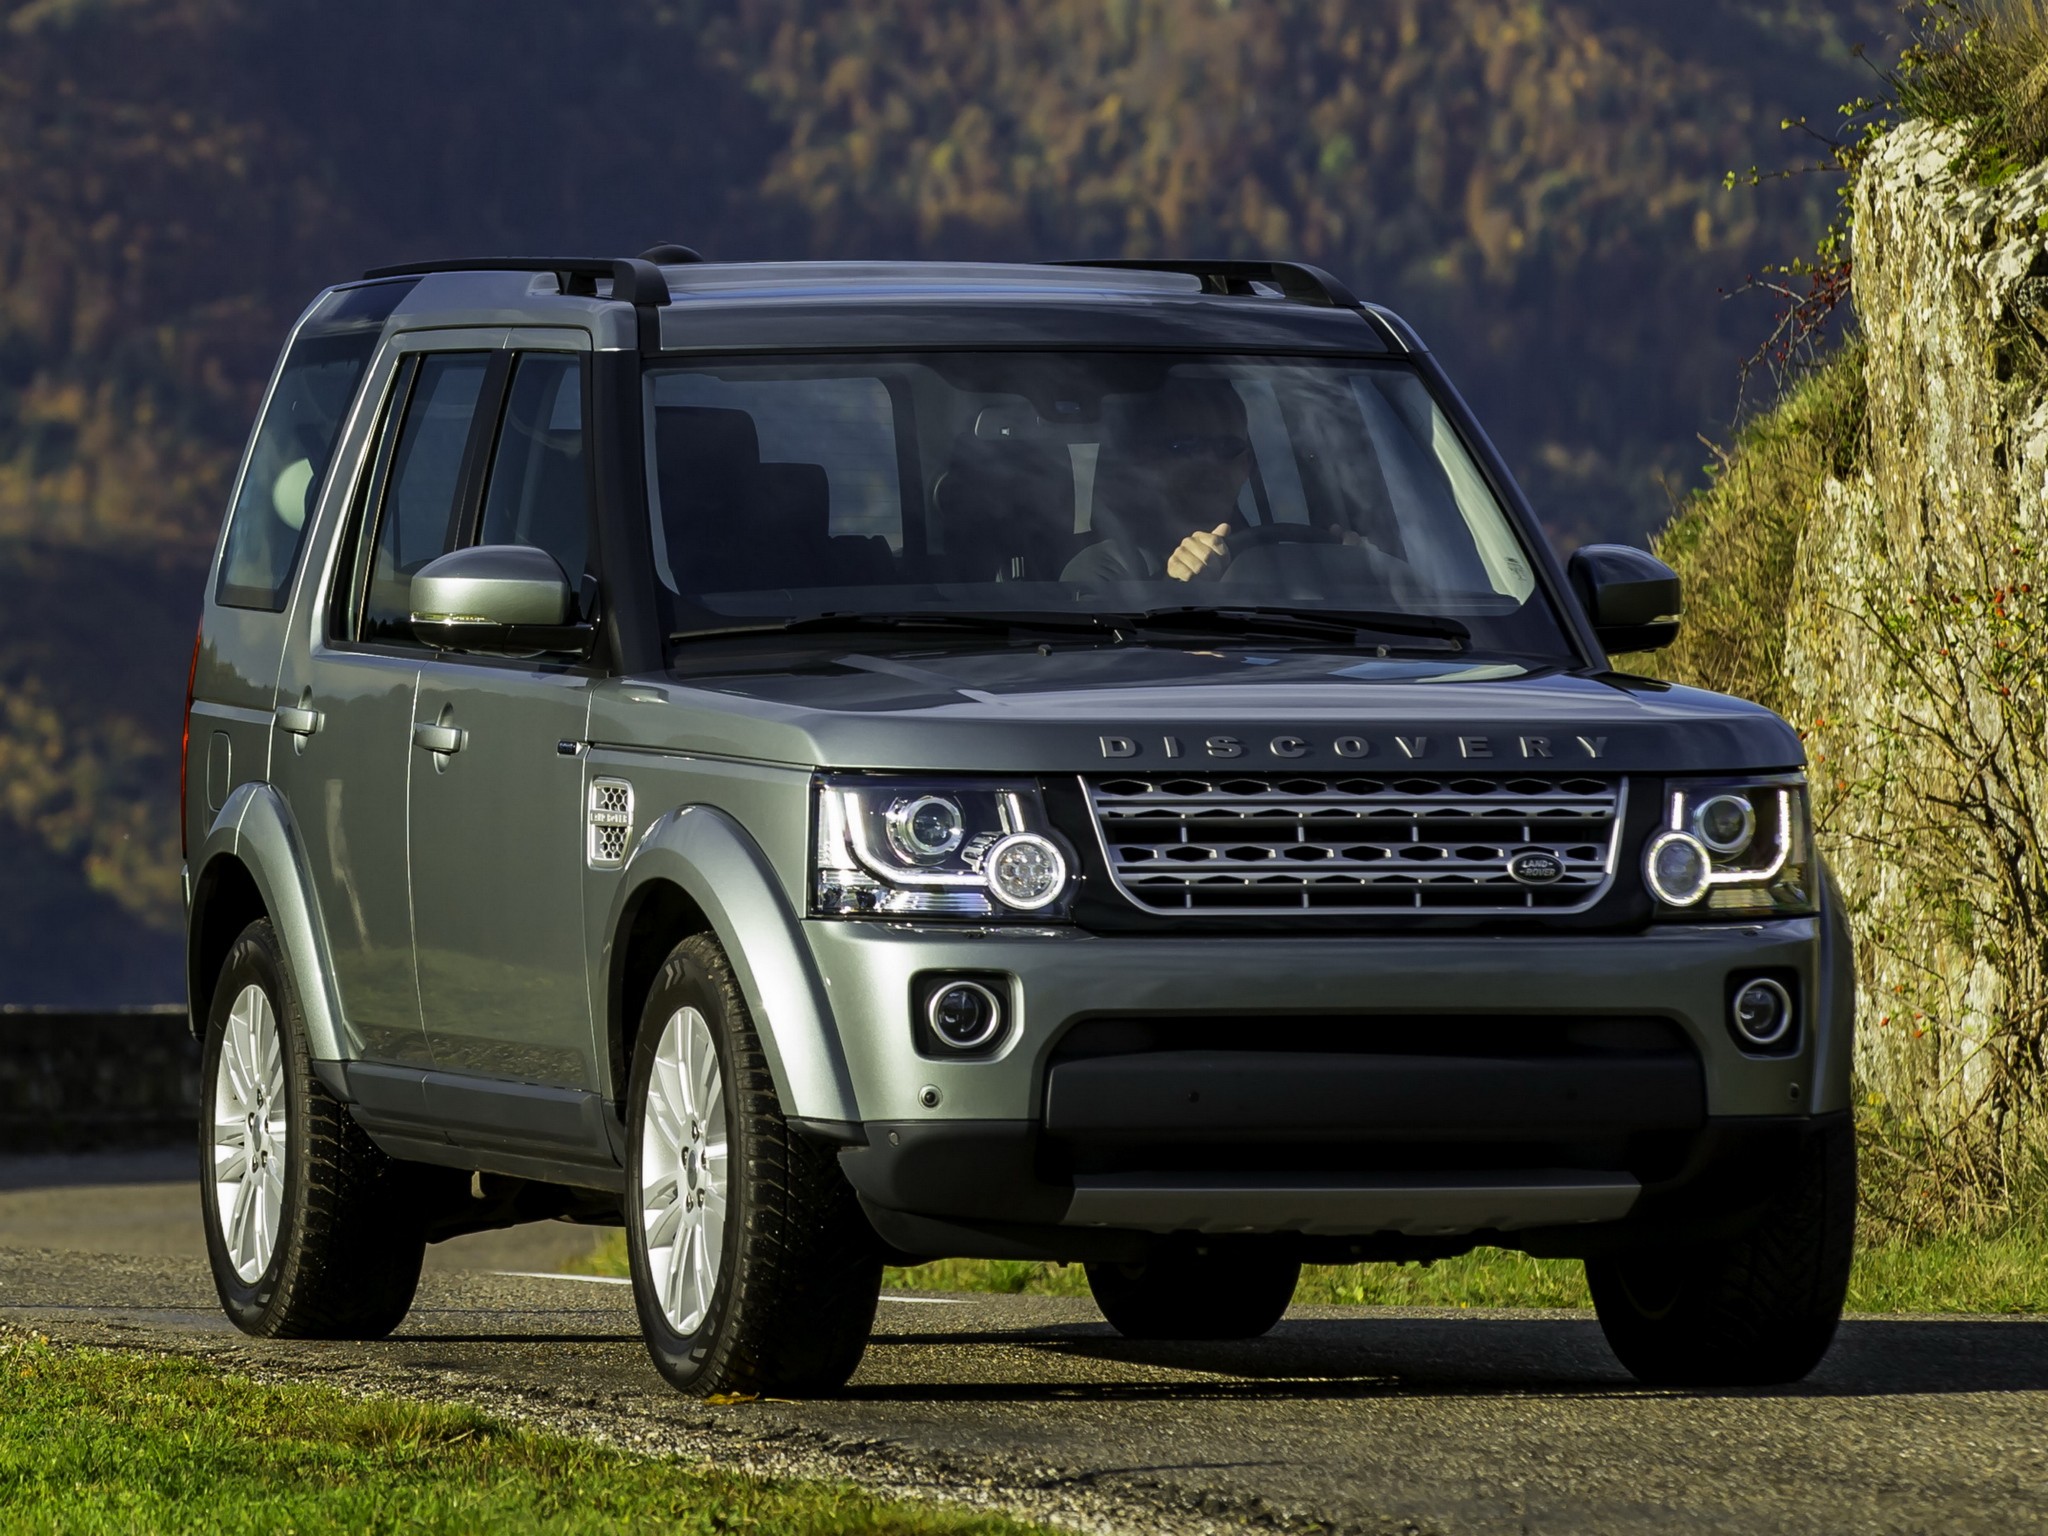 Land Rover Discovery 4 Modified